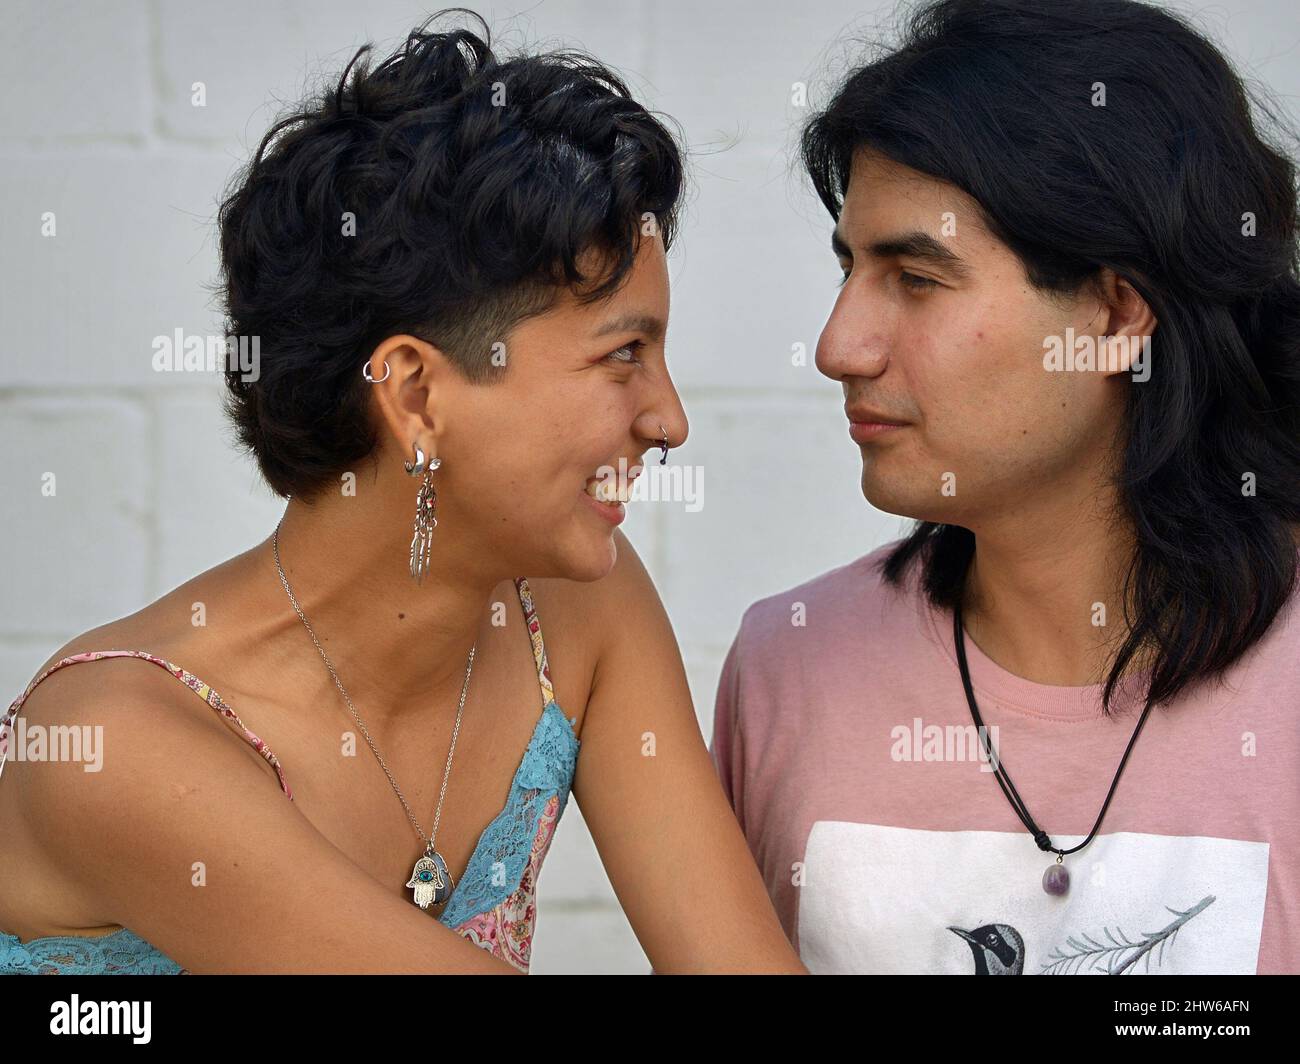 A beautiful smiling Mexican young Latina woman and a handsome serious Mexican young Latino man are in love and look into each other's eyes. Stock Photo